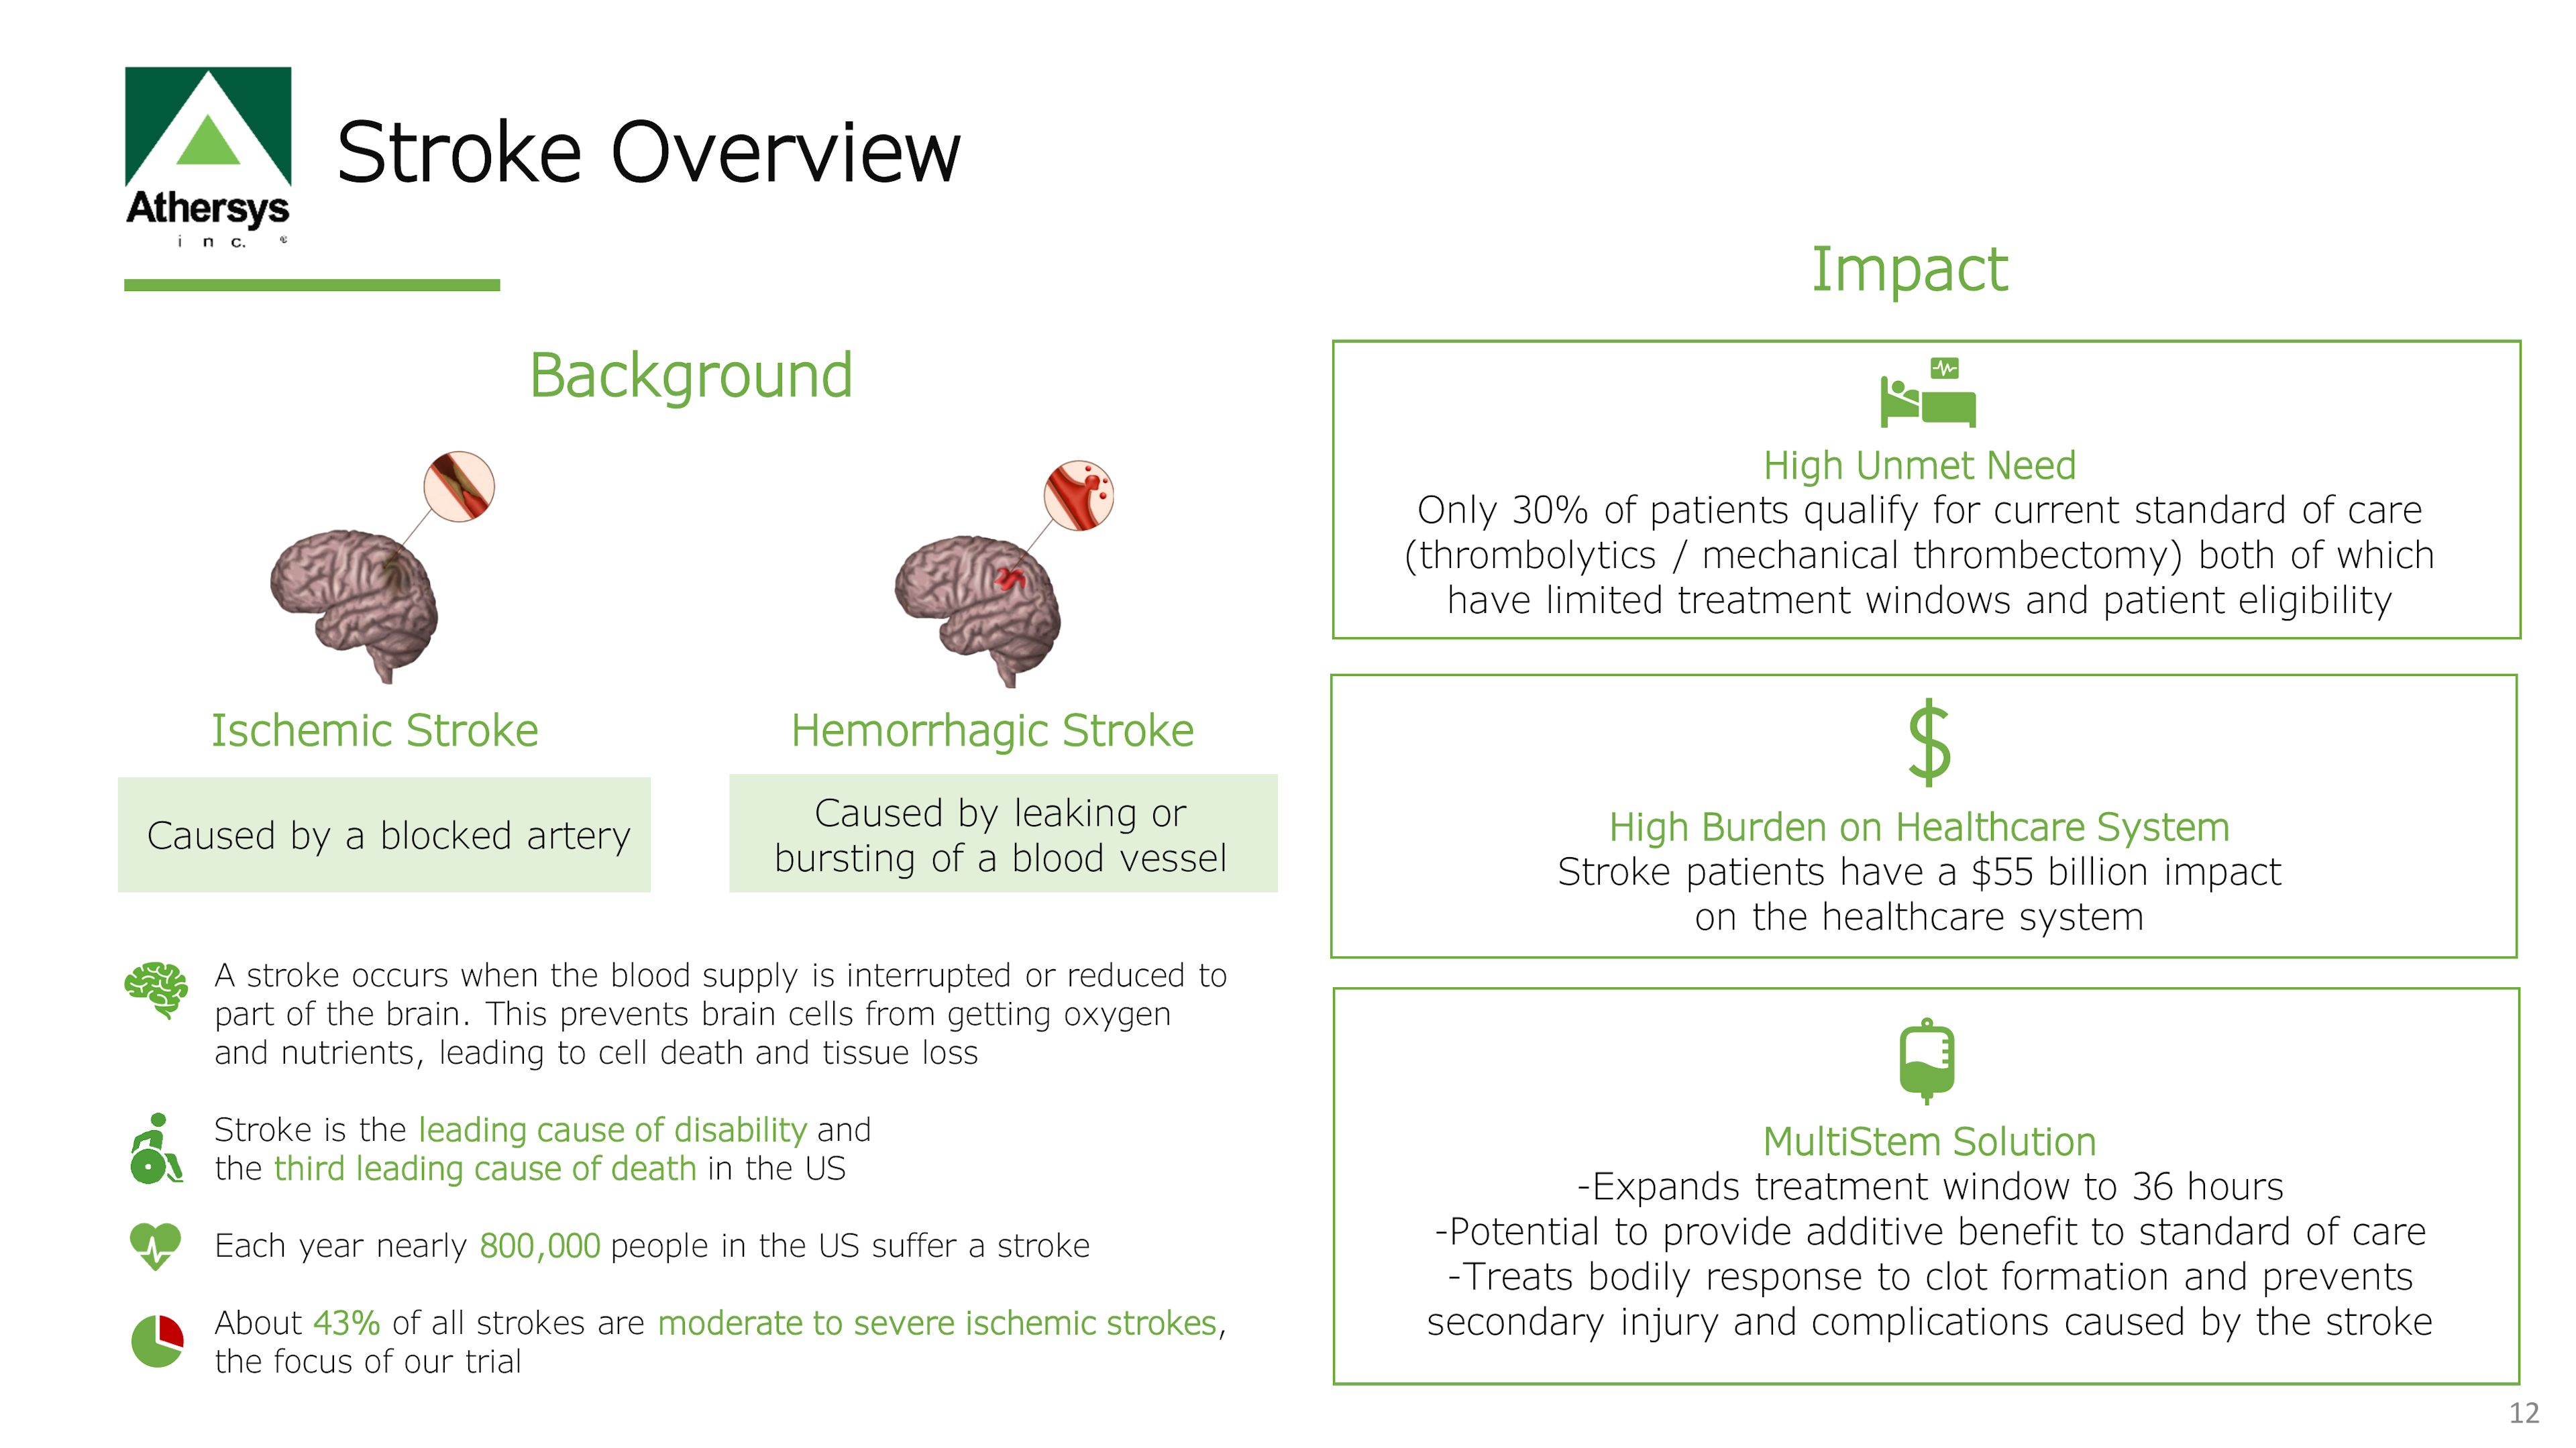 A Stroke Overview 
A